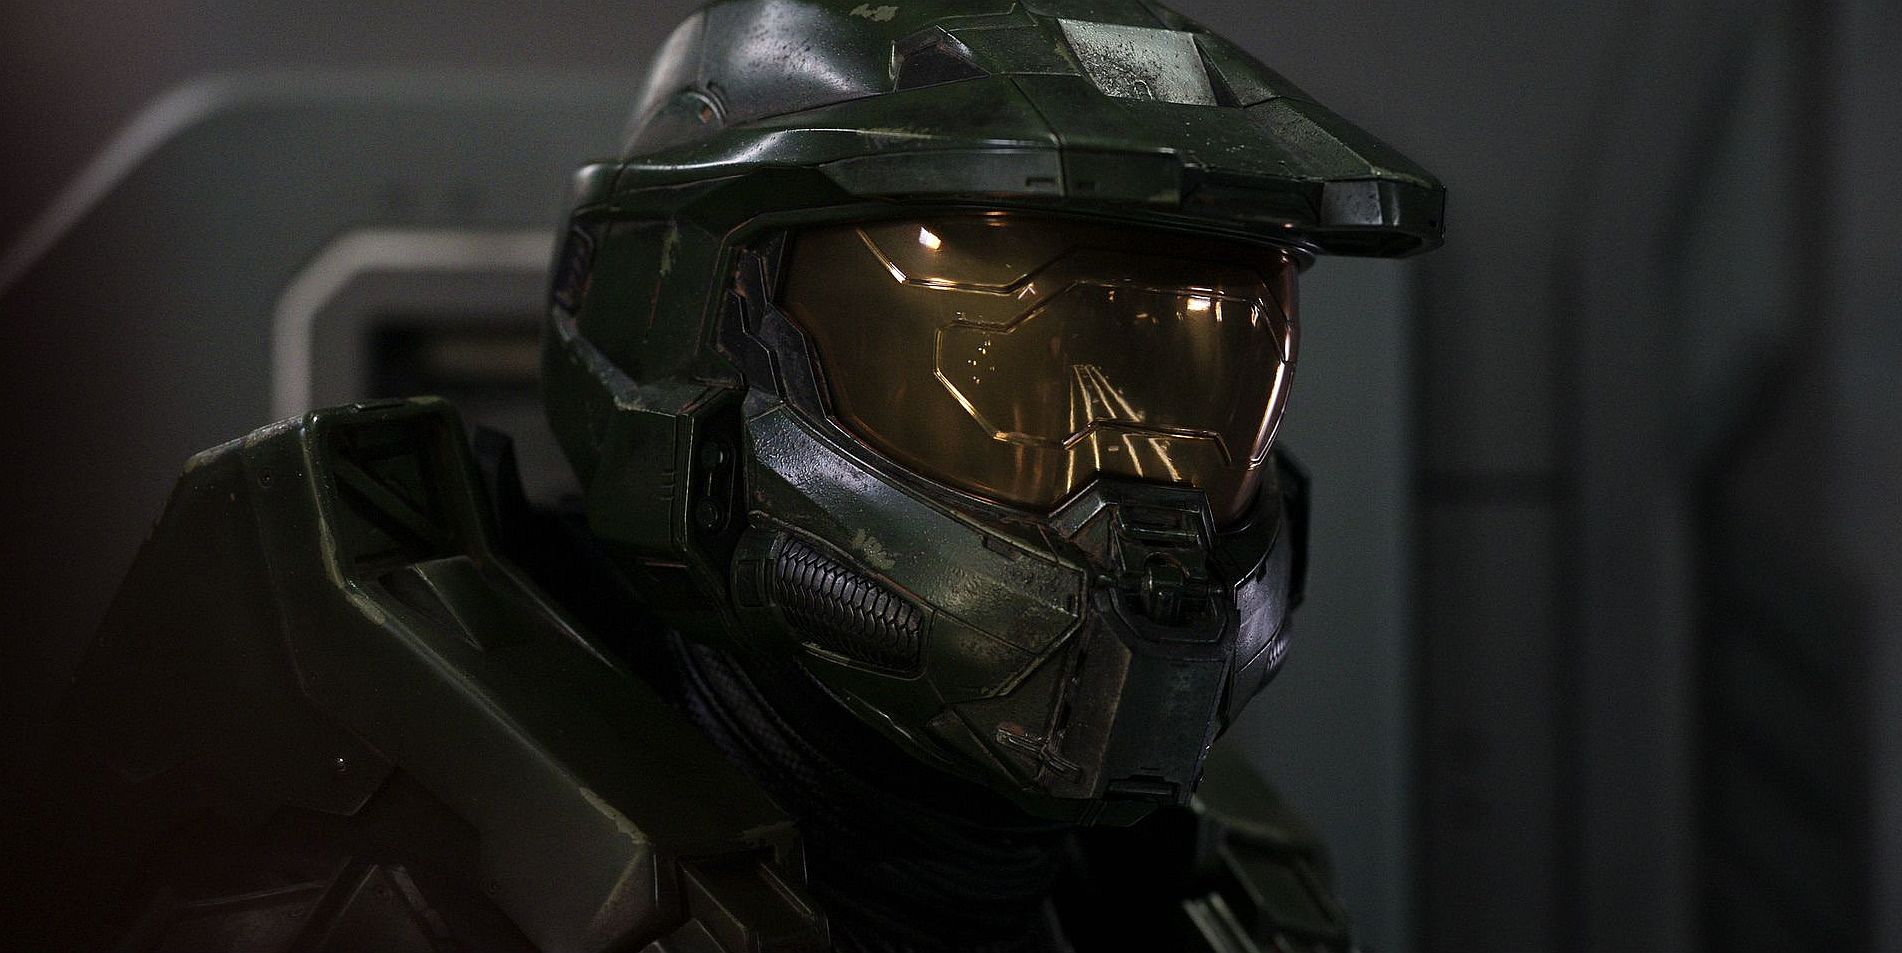 Image for The Halo series has already been renewed for a second season by Paramount+